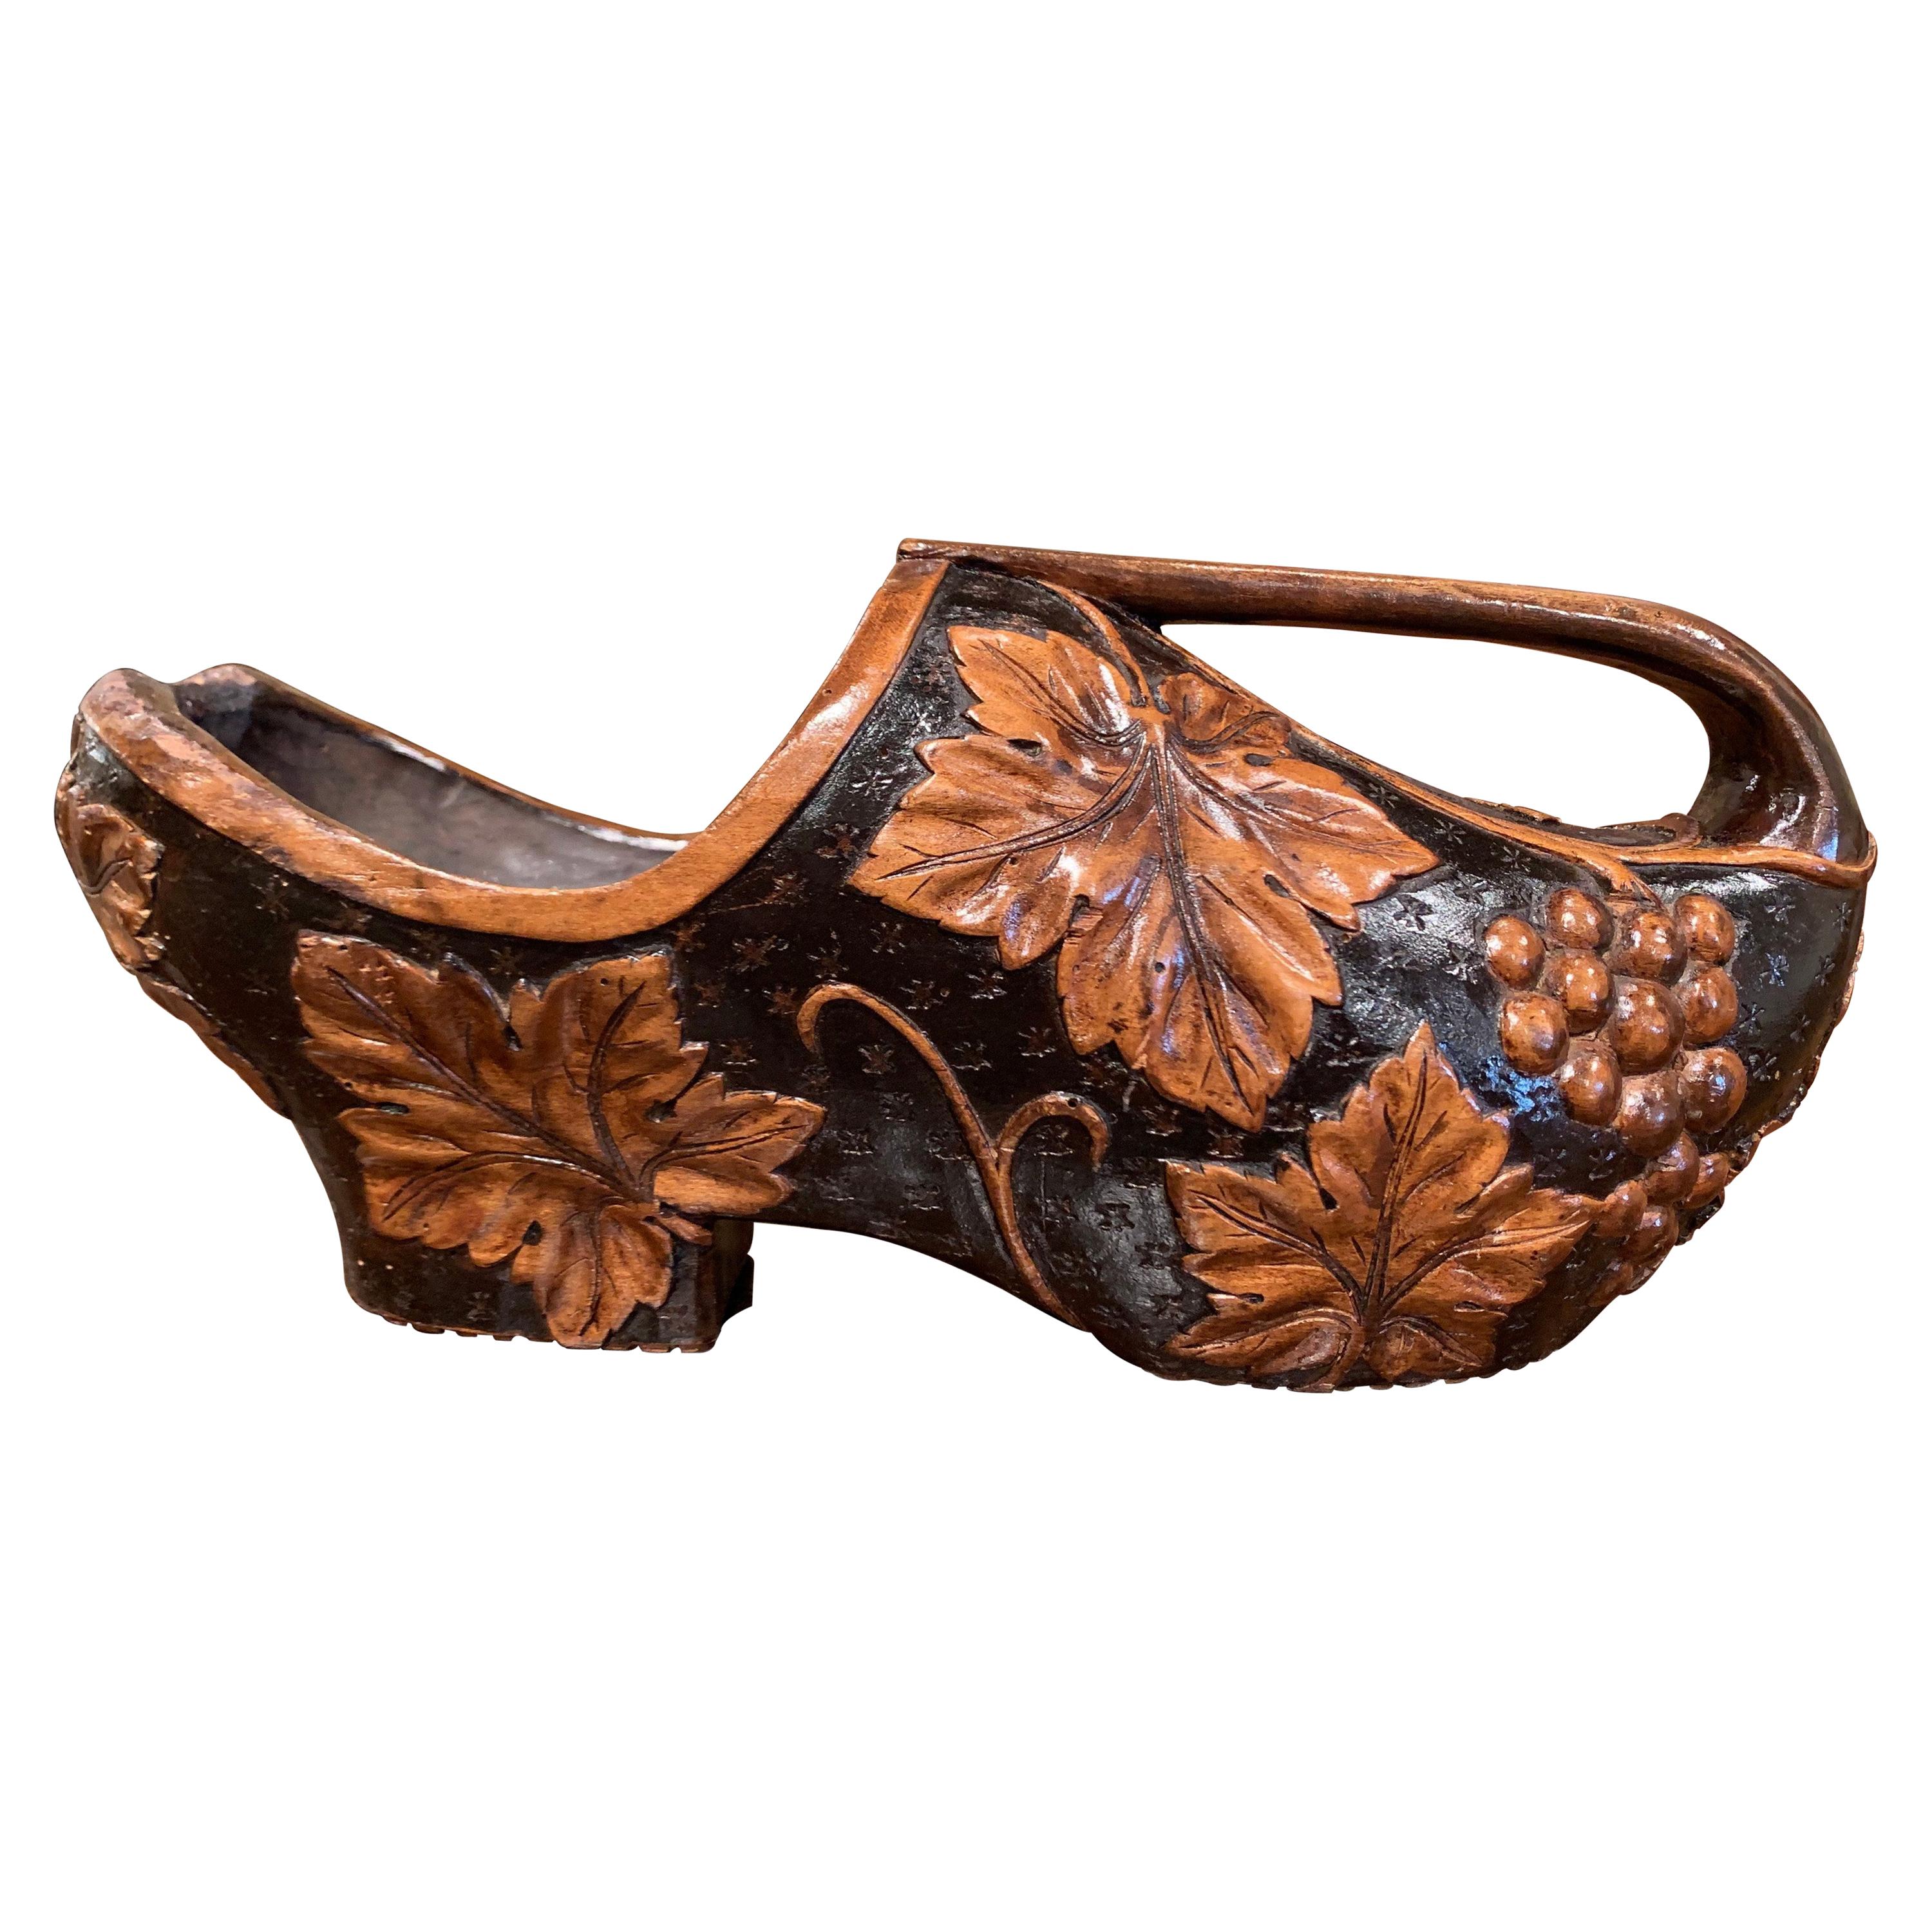 Early 20th Century French Carved Walnut Wine Bottle Holder Clog with Vine Decor For Sale